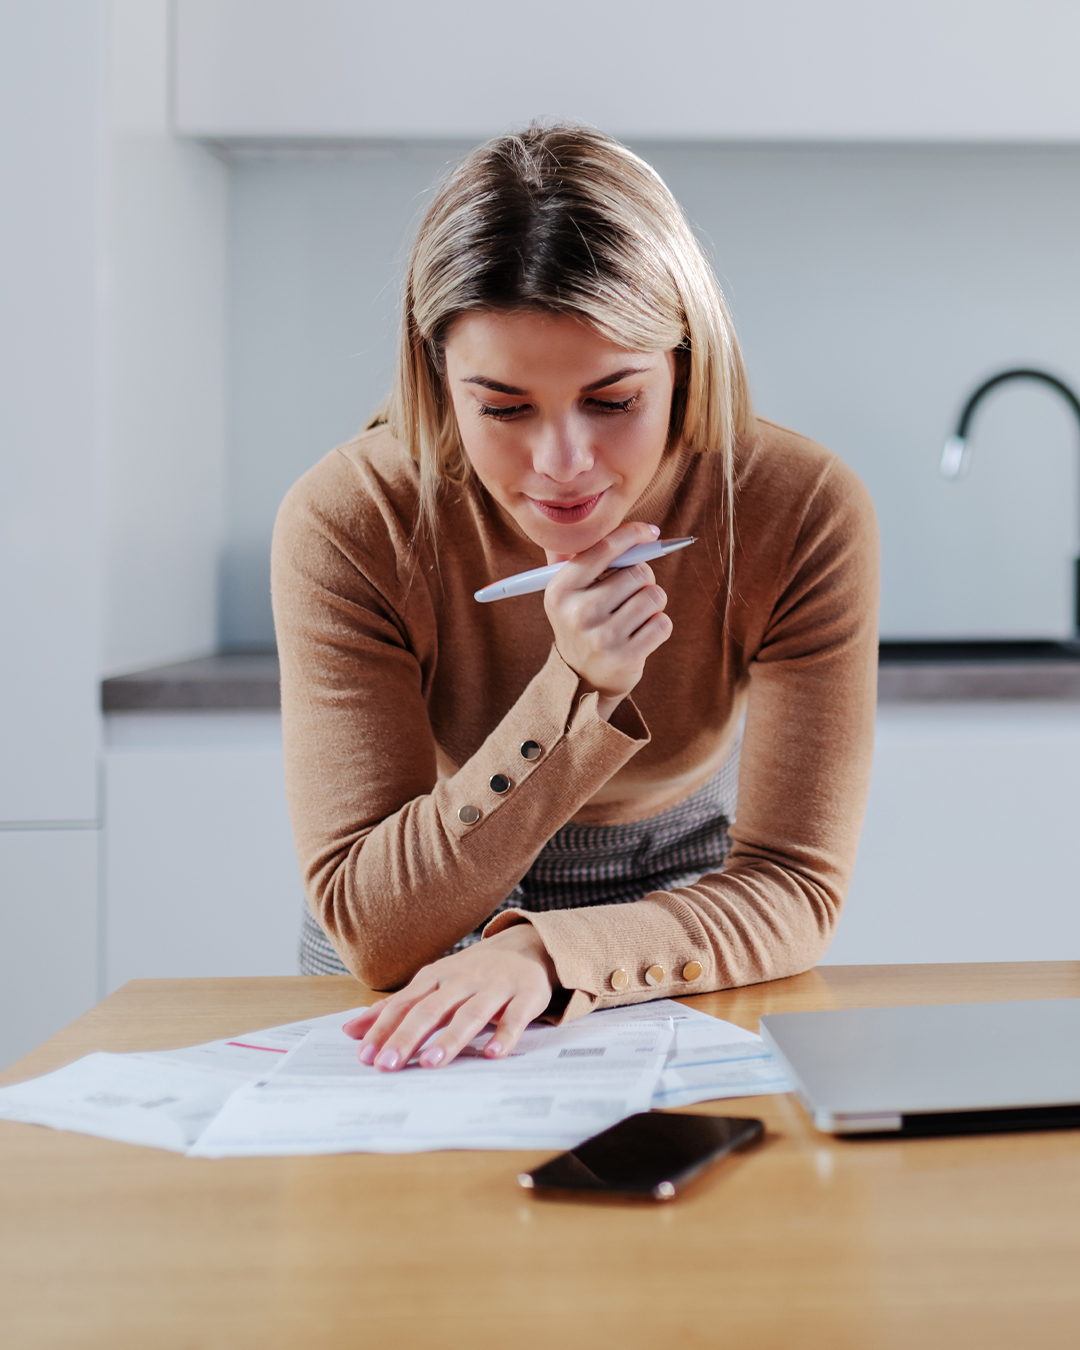 Woman looks at forms with pen in her hand